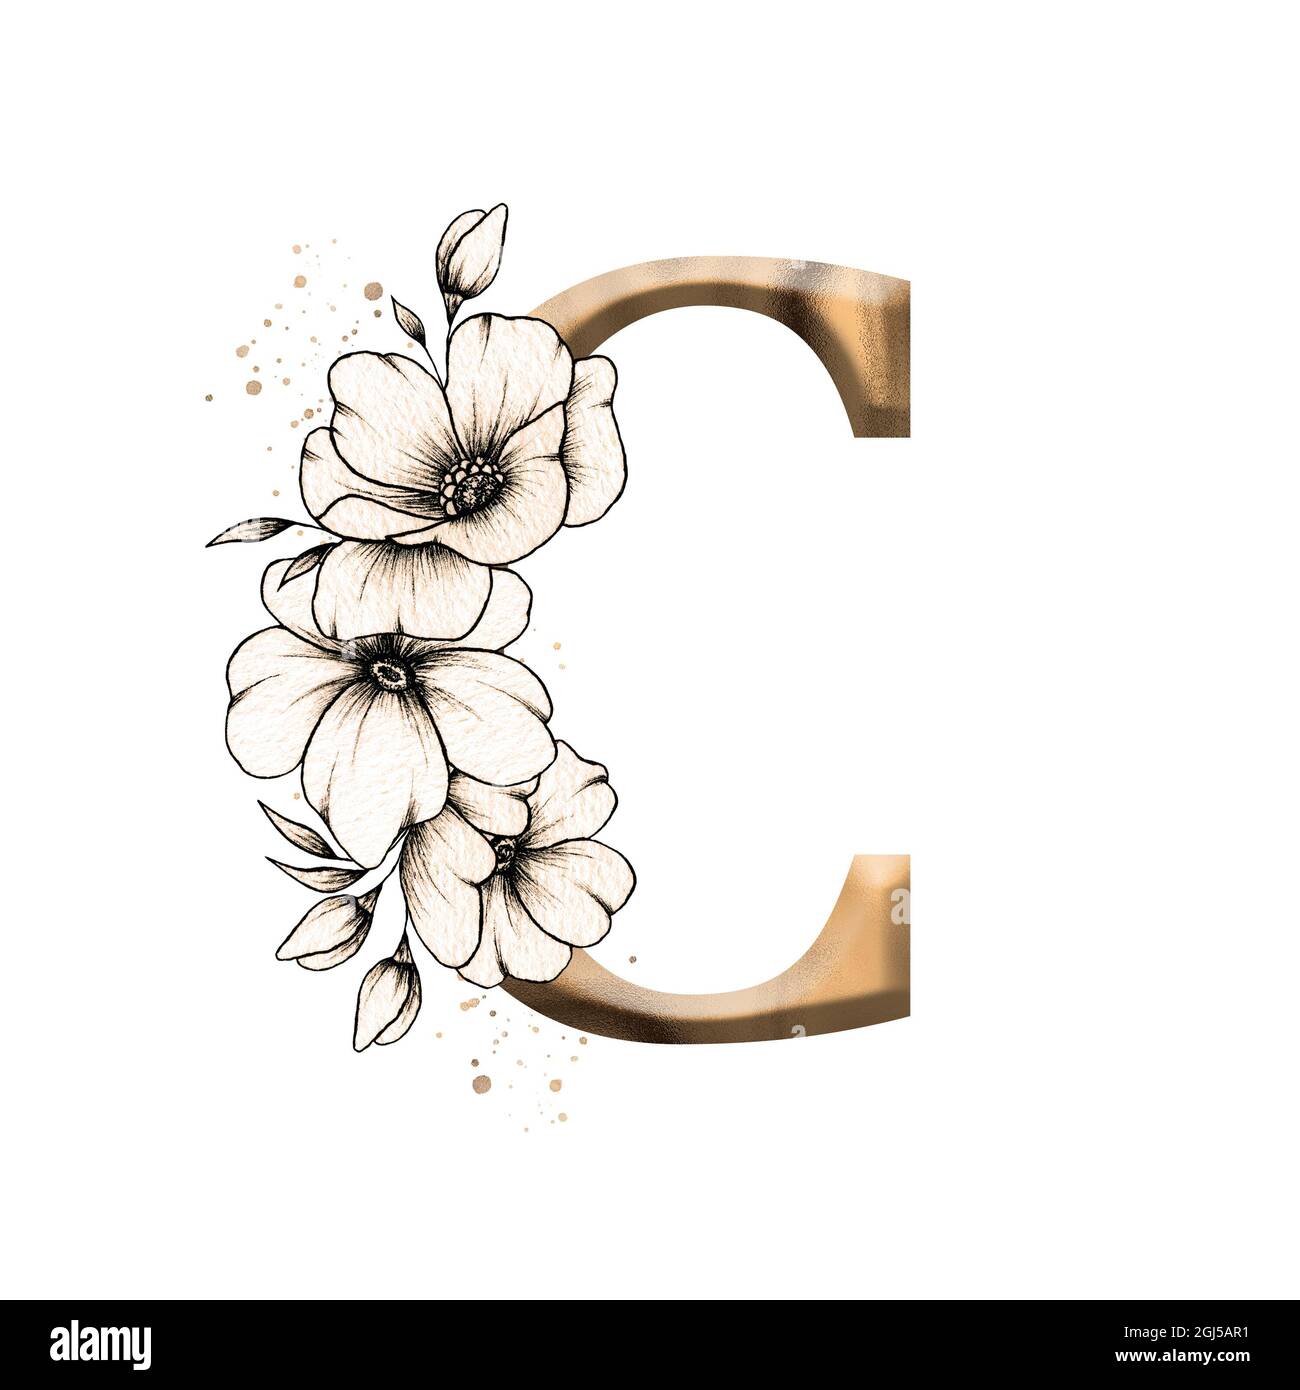 Graphic floral alphabet, gold letter C with vintage flowers bouquet  composition, unique monogram initial perfect for wedding invitations,  greetings Stock Photo - Alamy